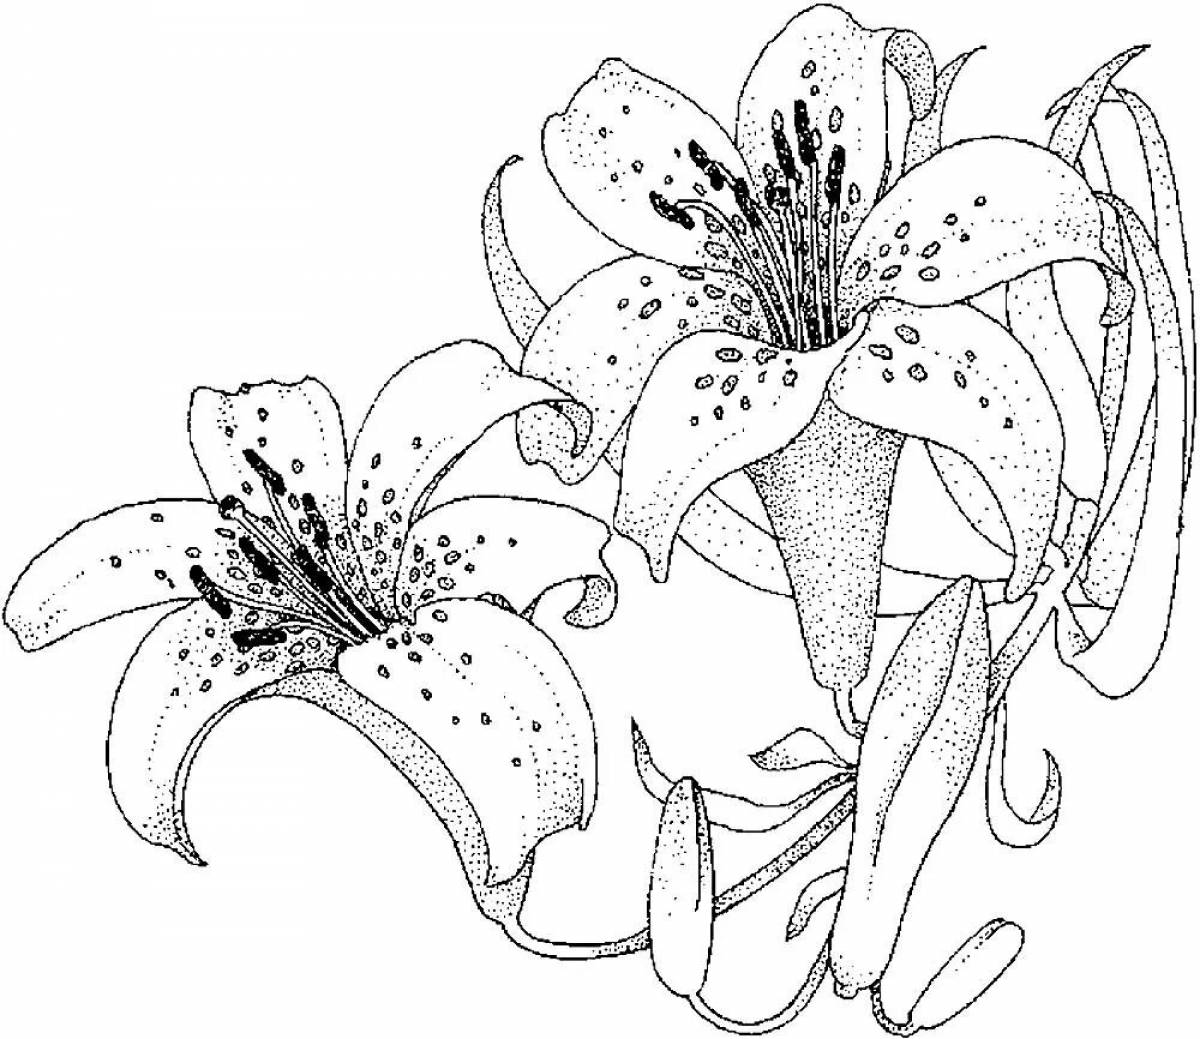 Lily flowers #8